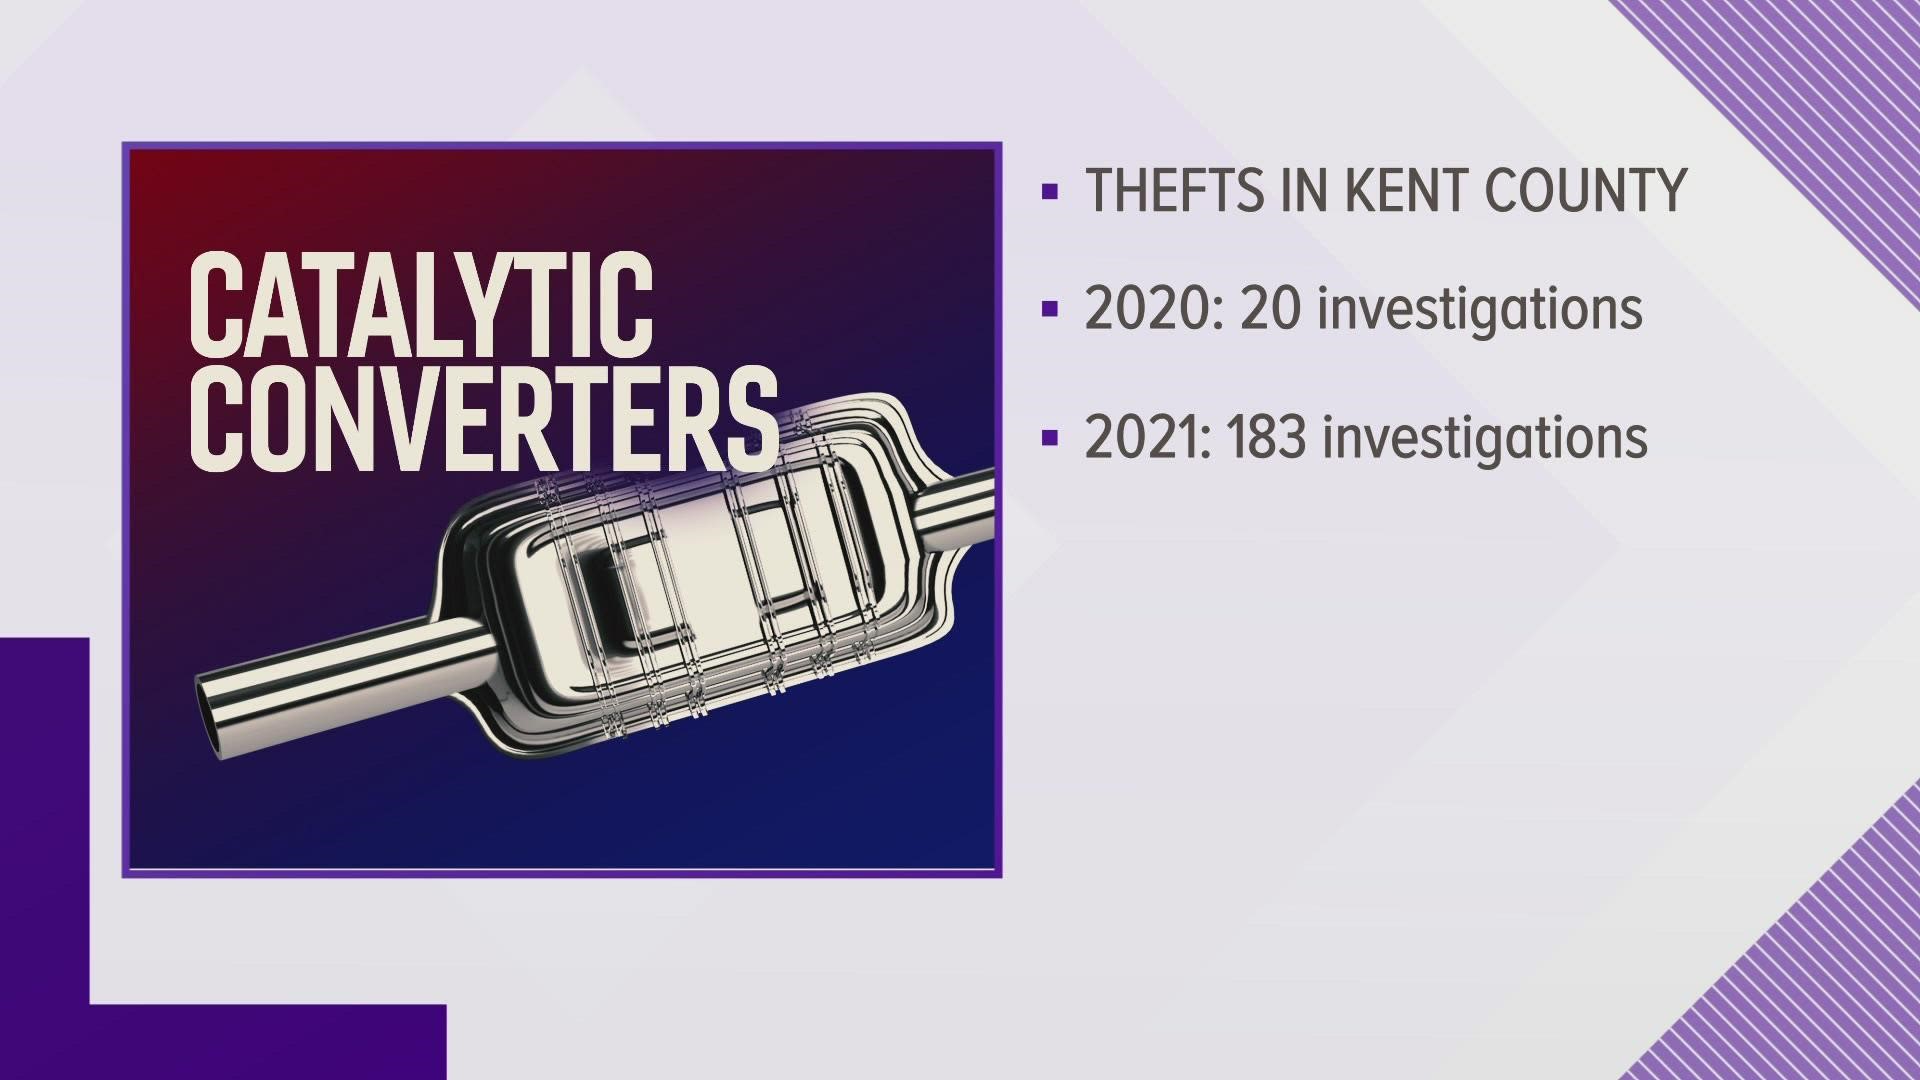 Catalytic converter thefts are up more than 800 percent in Kent County this year.